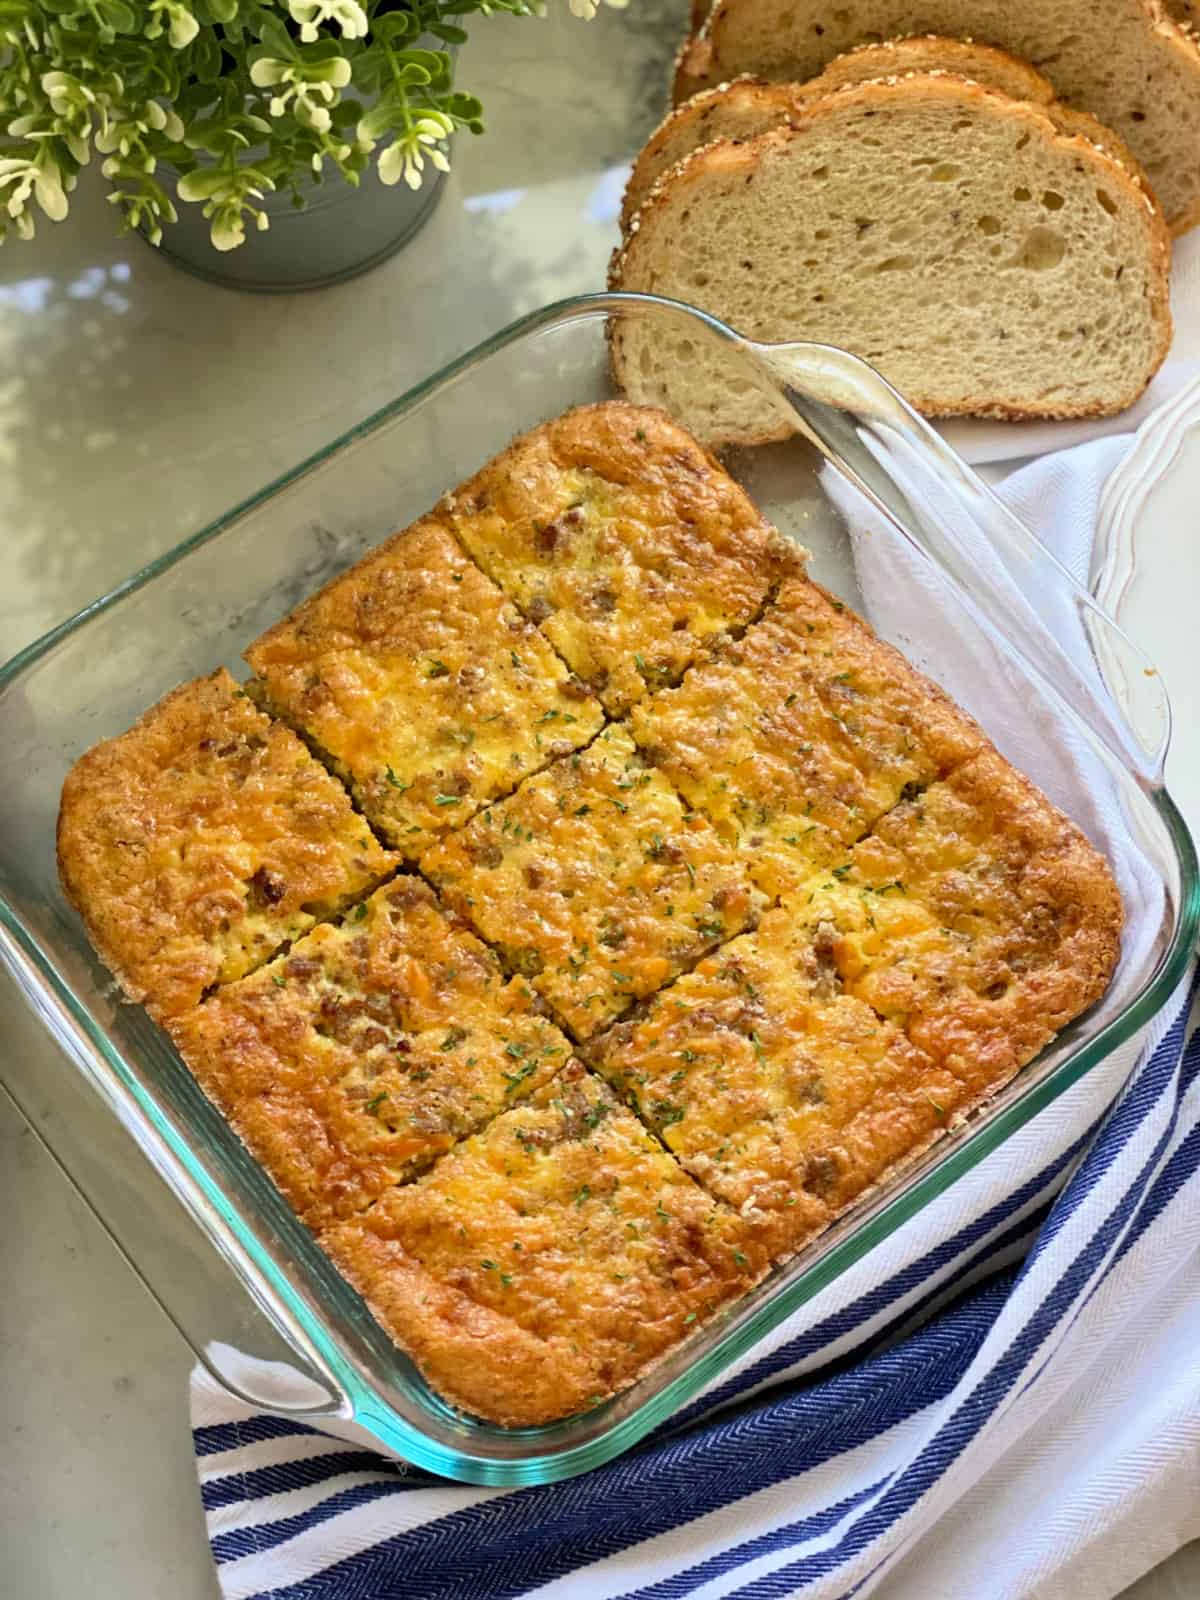 Glass square dish with egg casserole cut into 9 squares with bread slices on the side.